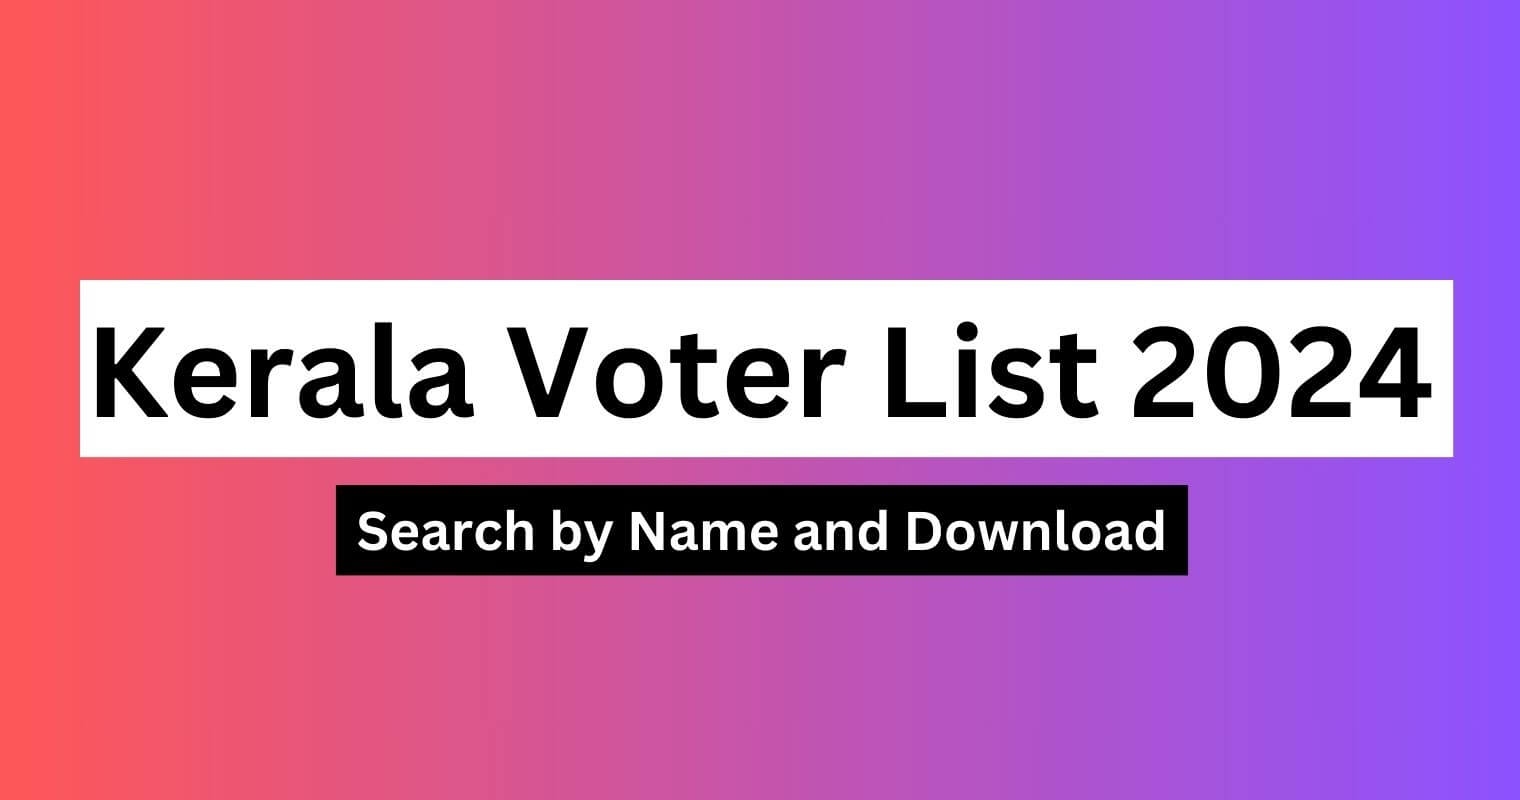 Kerala Voter List 2024 Search By Name, Download